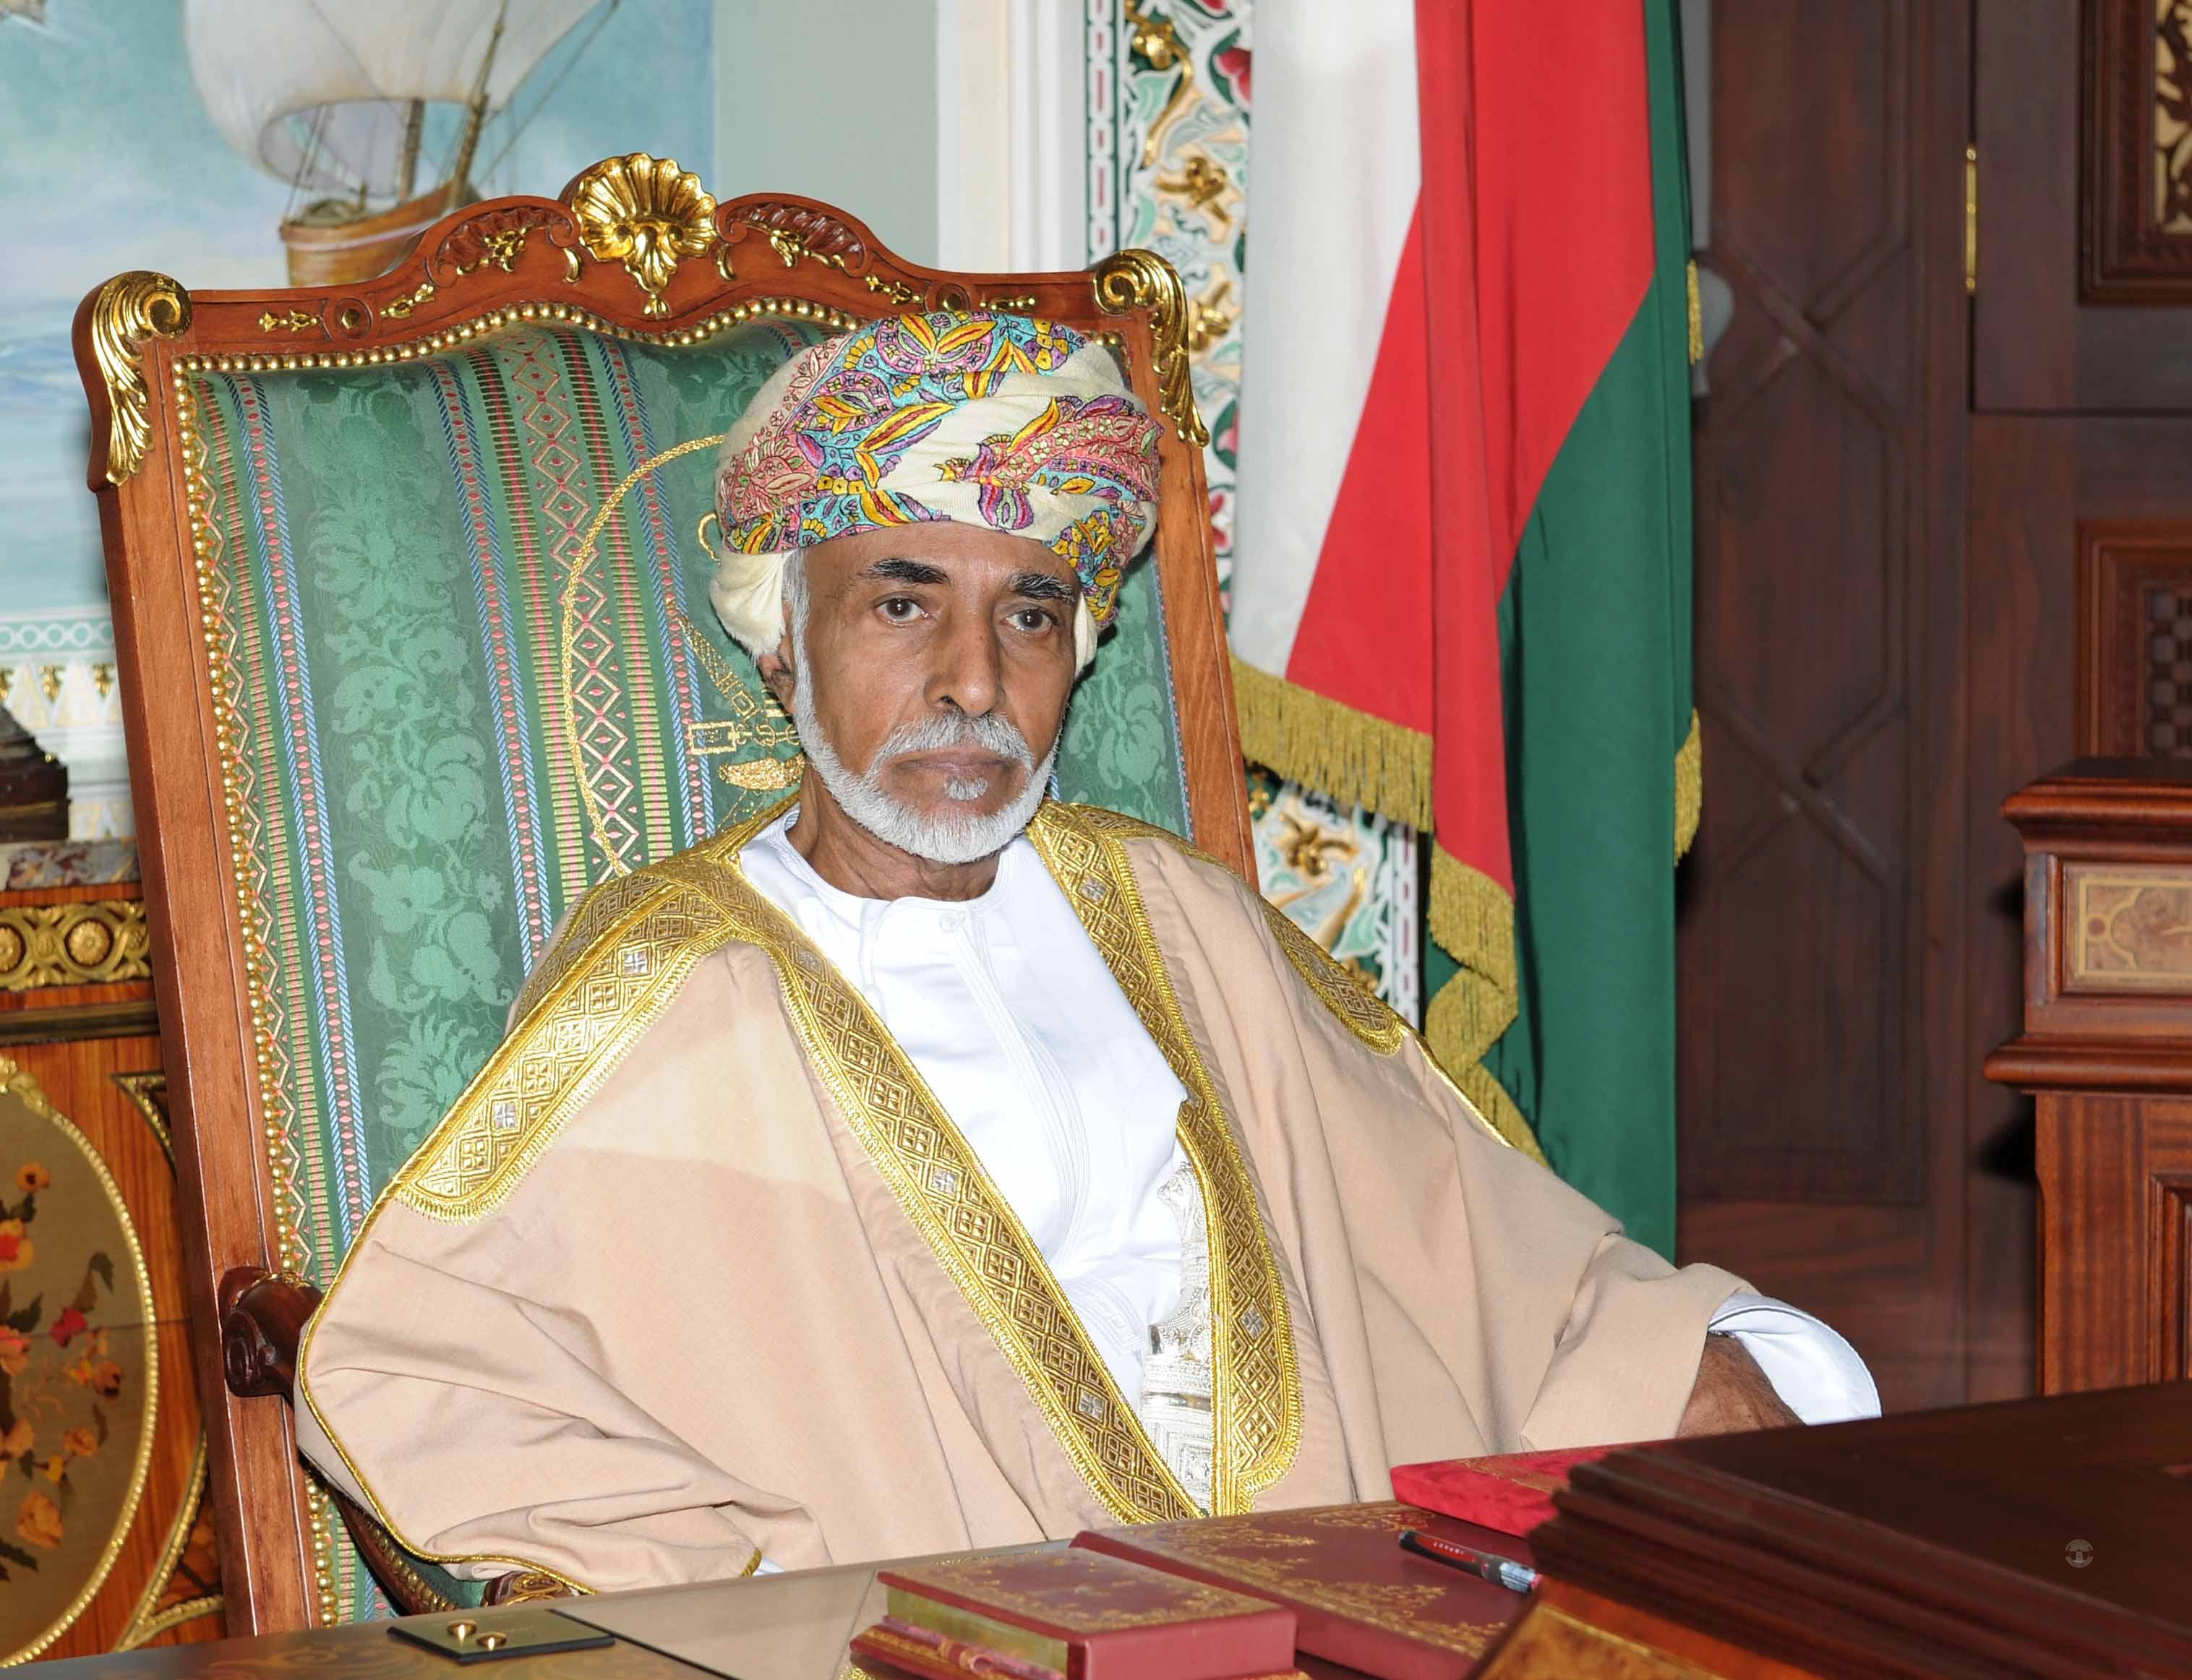 His Majesty Sultan Qaboos issues two Royal decrees